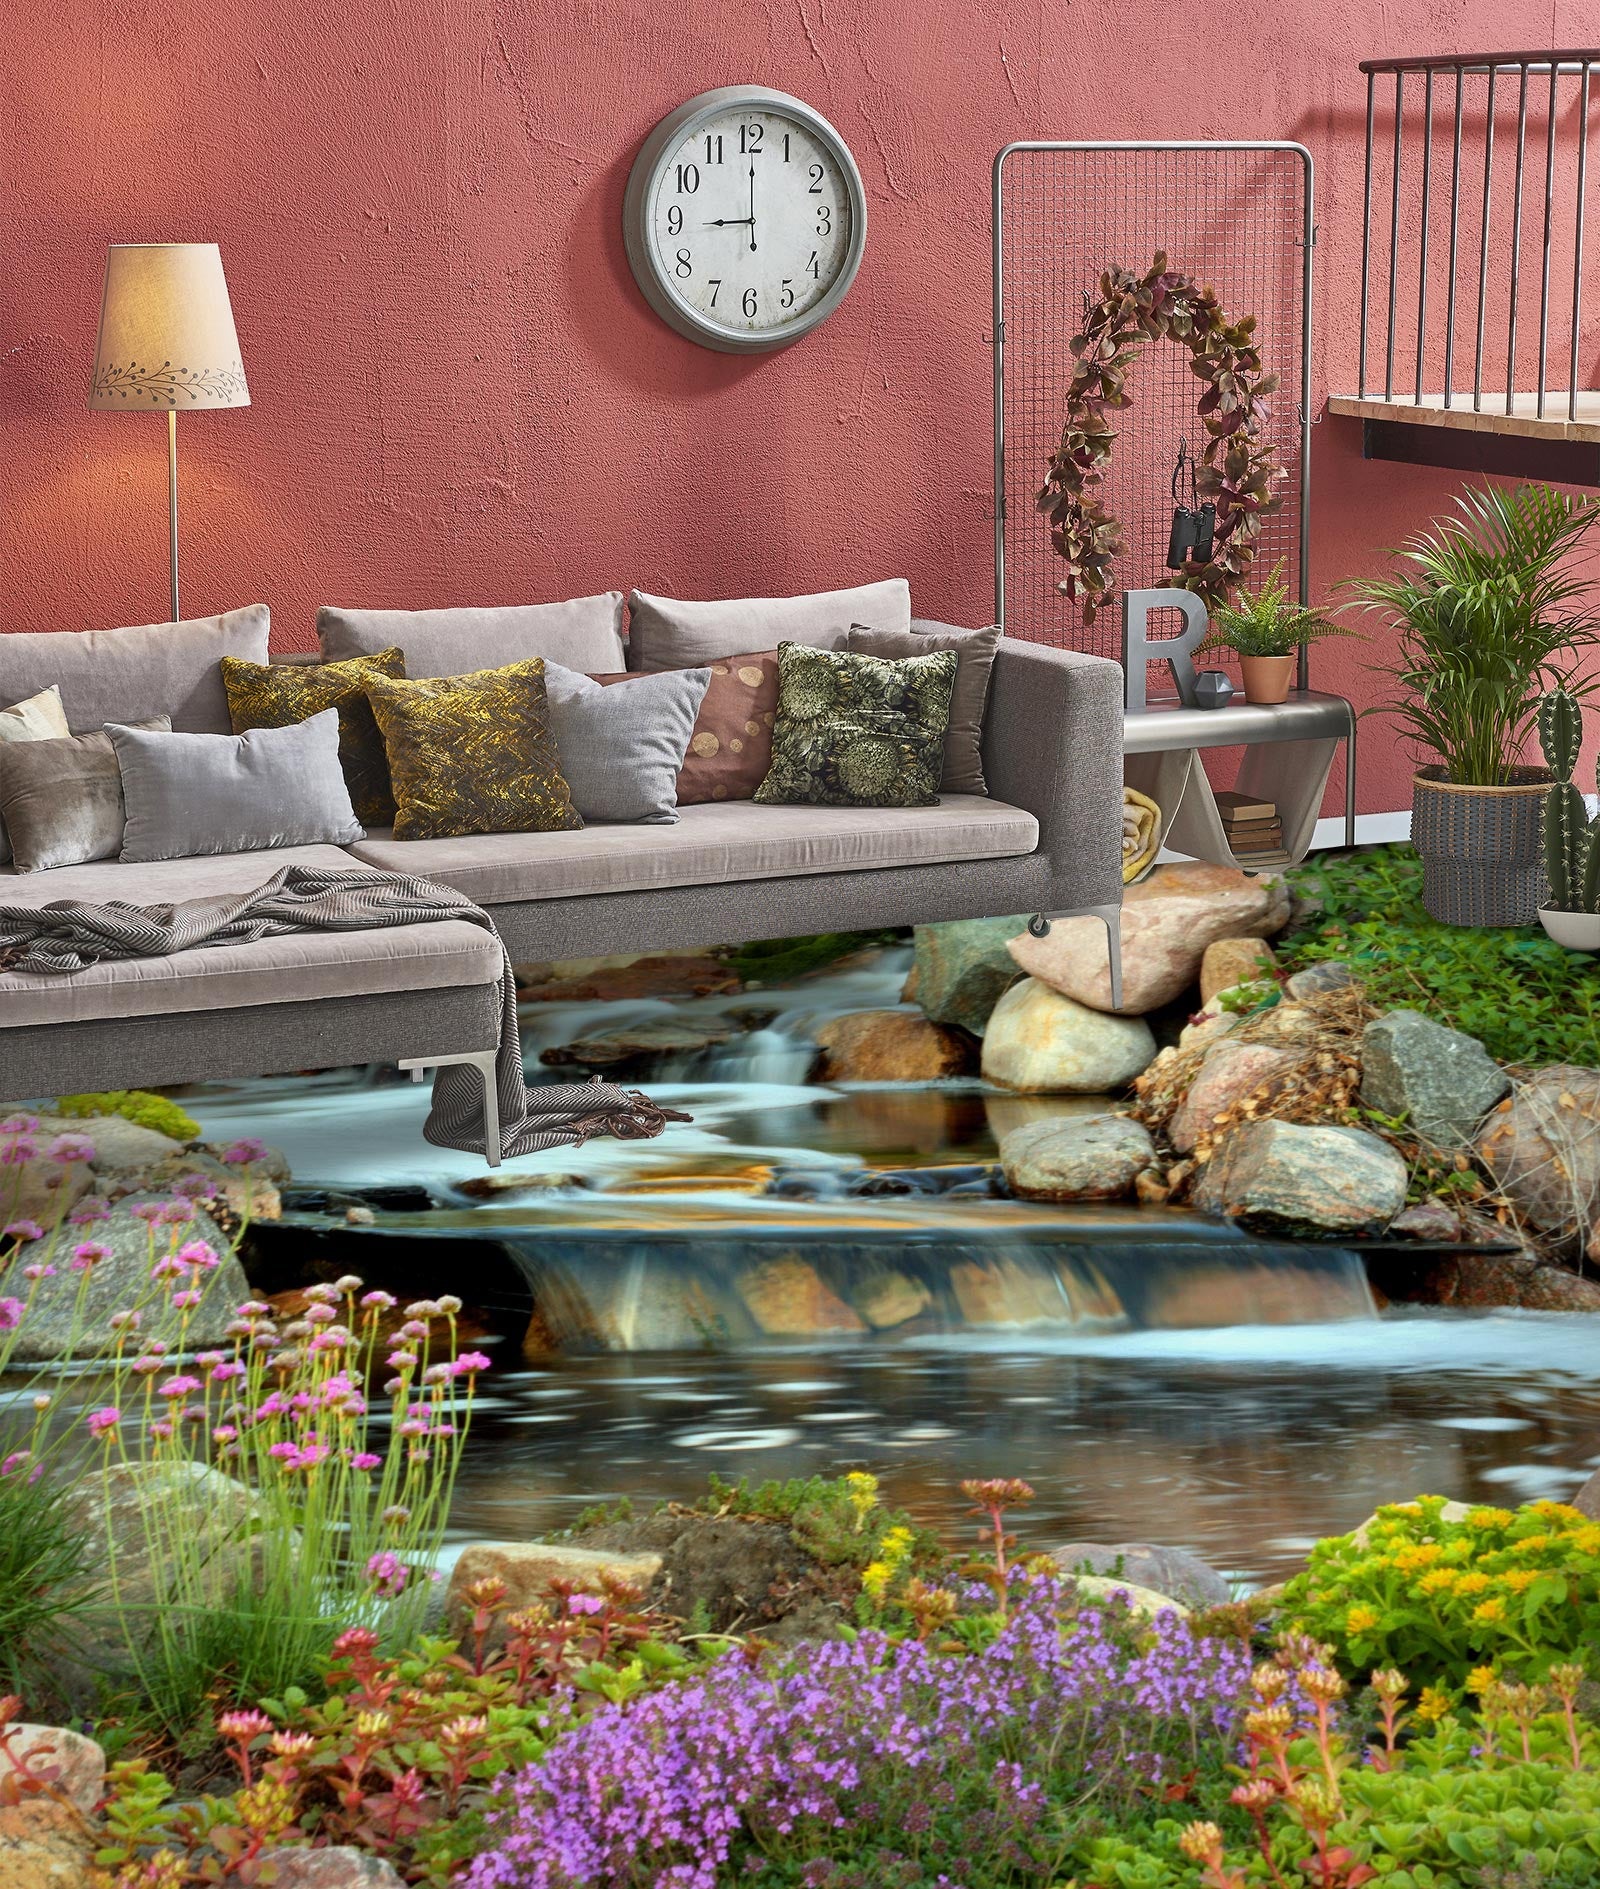 3D Warm Pond In Spring 1049 Floor Mural  Wallpaper Murals Self-Adhesive Removable Print Epoxy